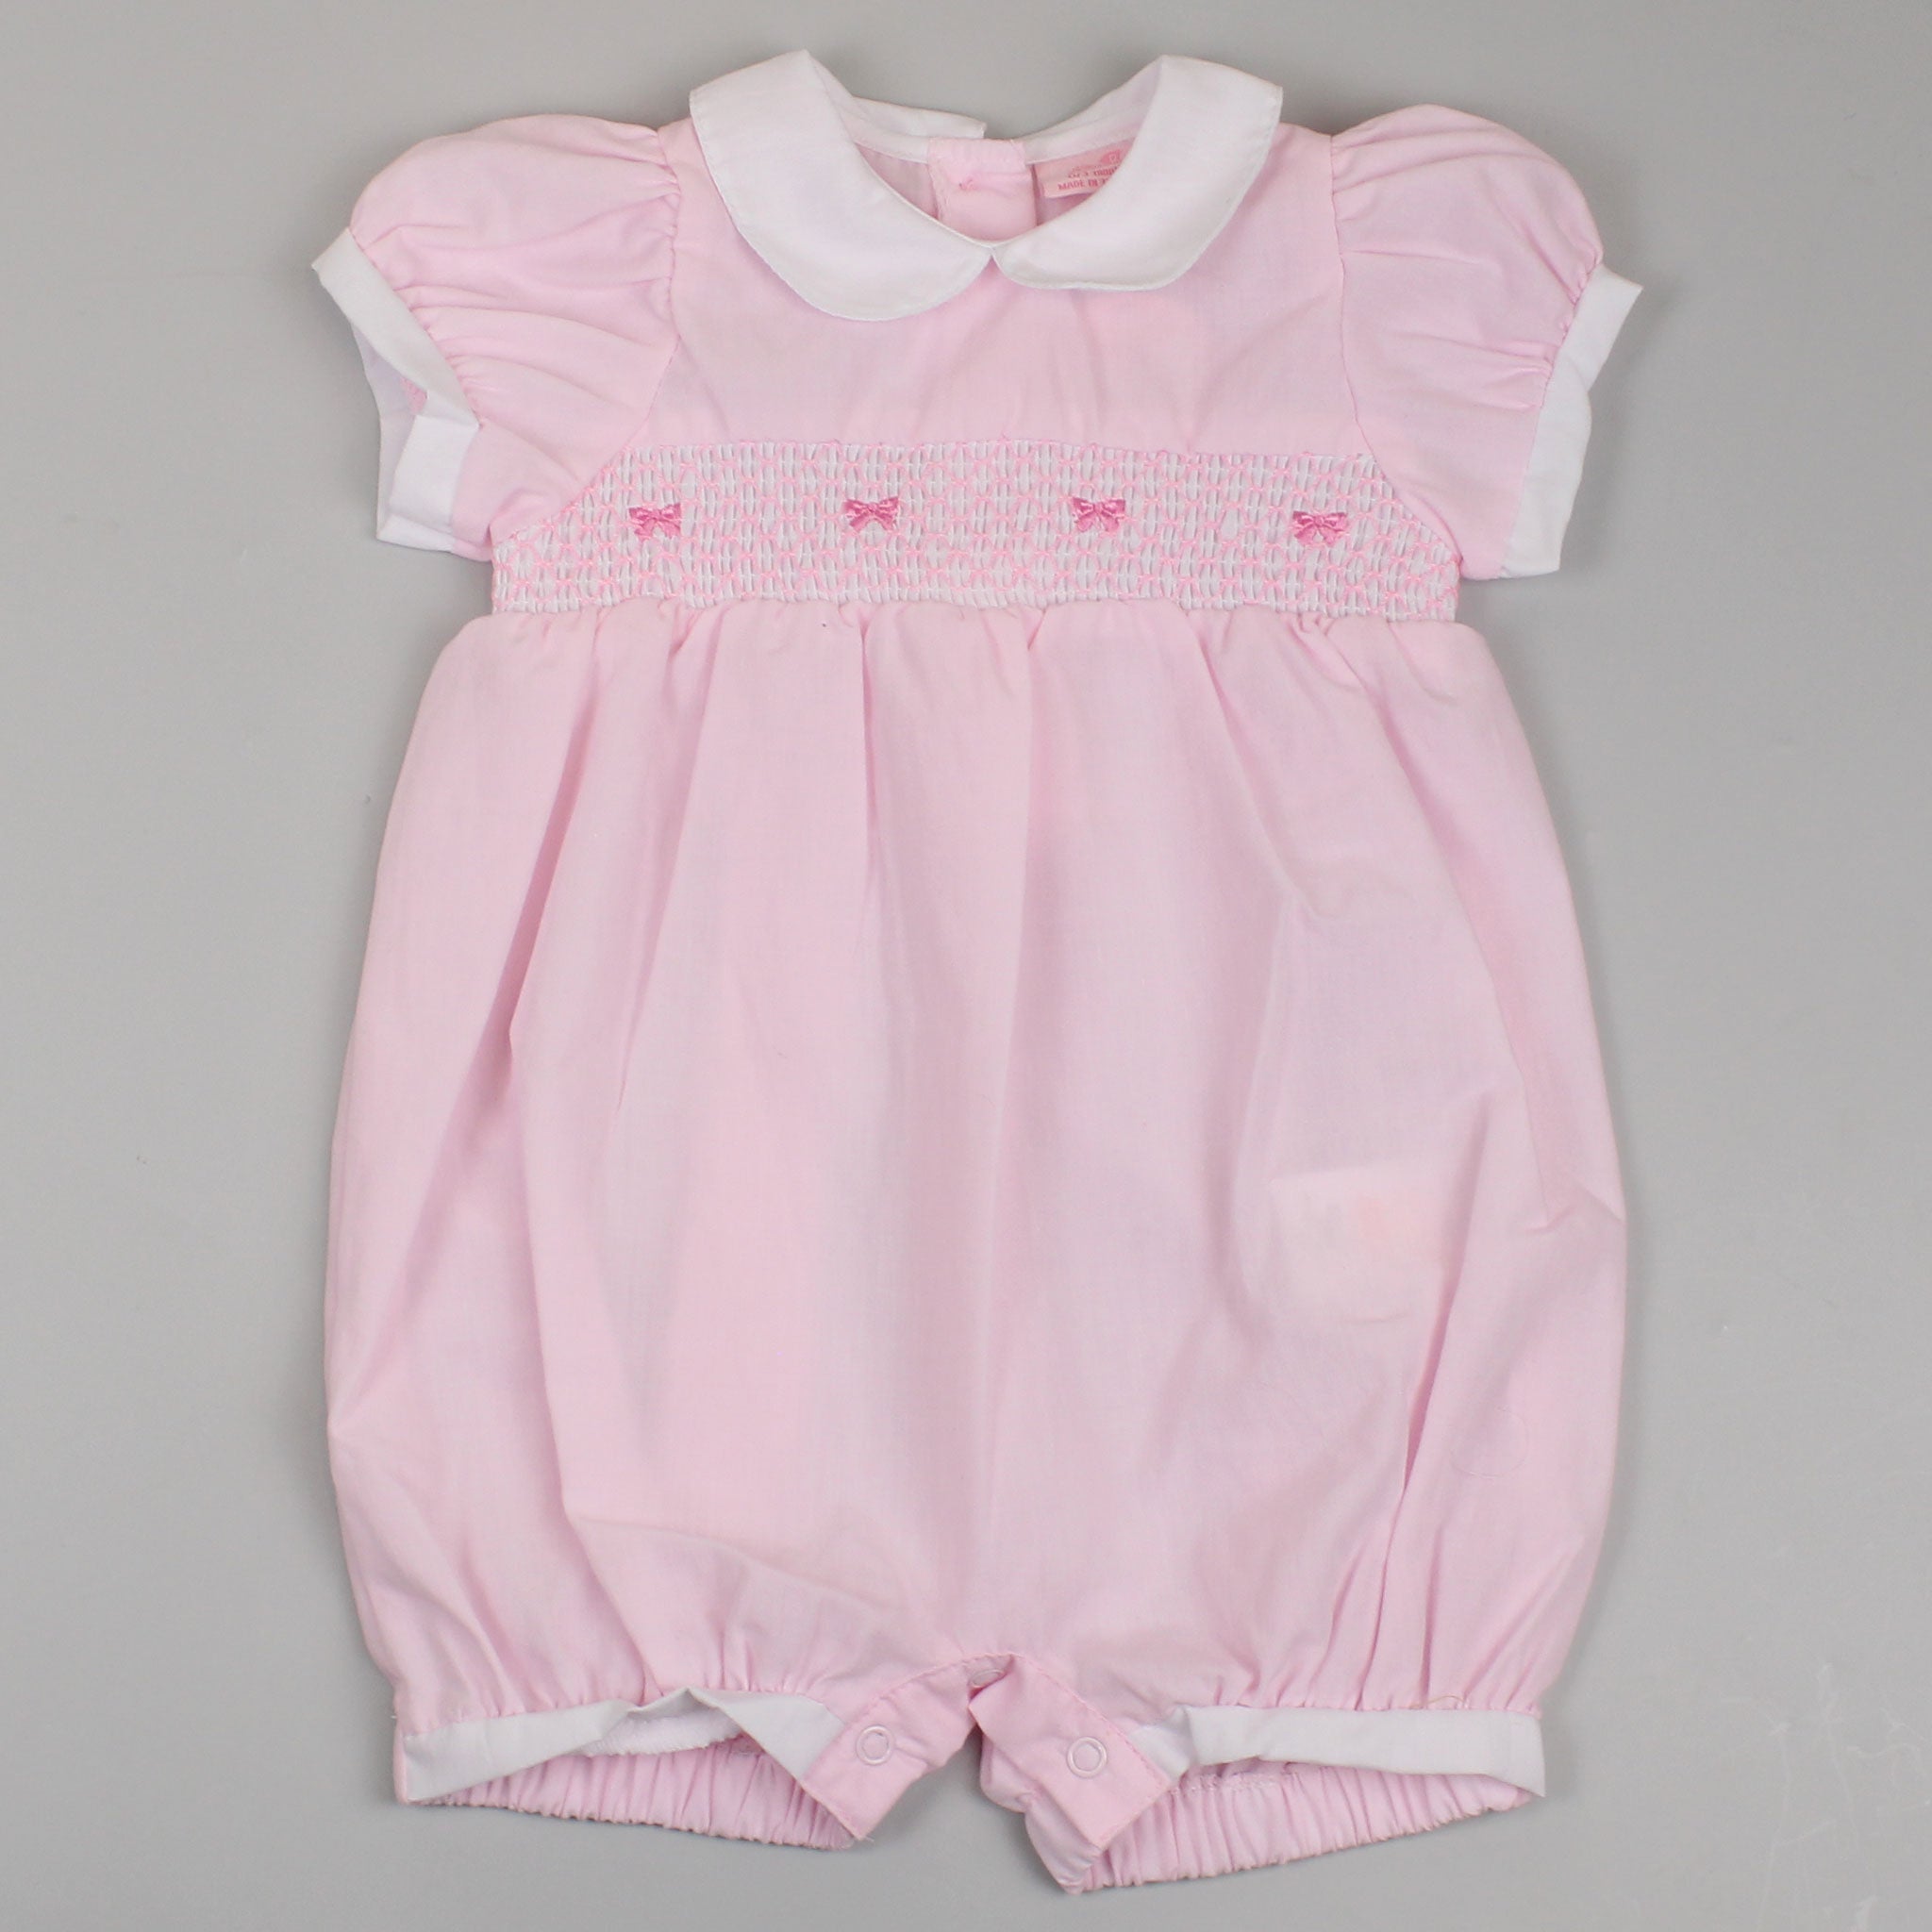 baby girls smocked pink outfit with collar